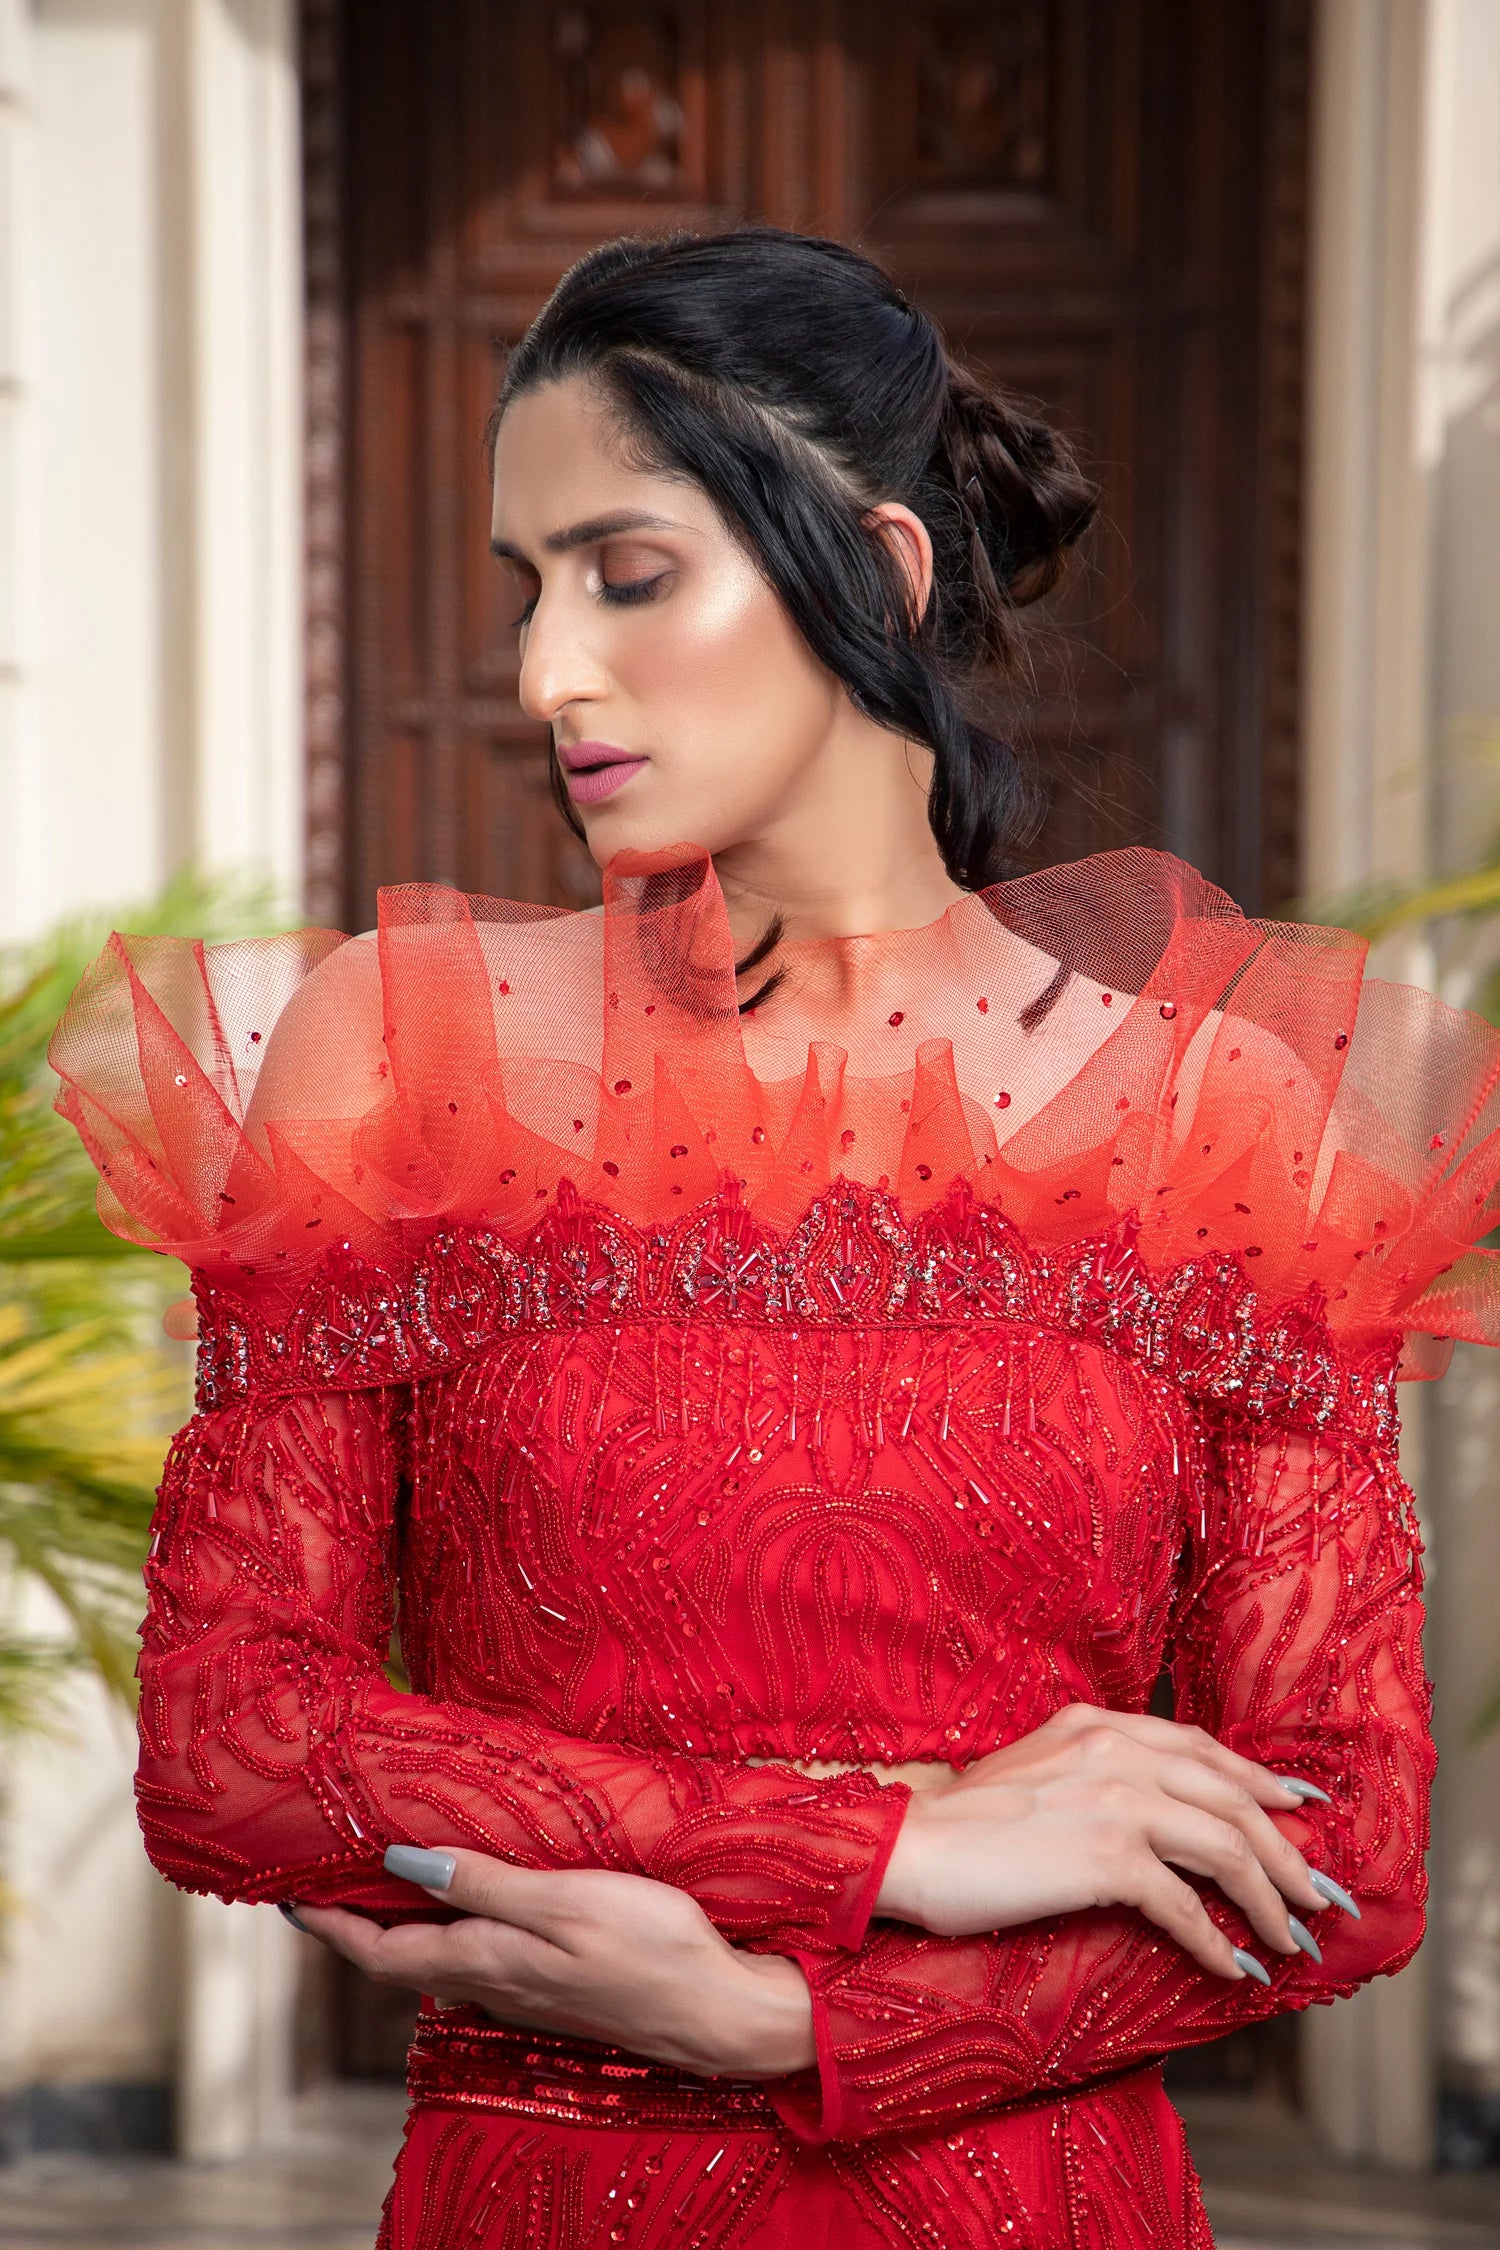 Red Architectural Draped Blouse With Winged Dupattas And Glass Bead And Sequin Embrodered Lehenga